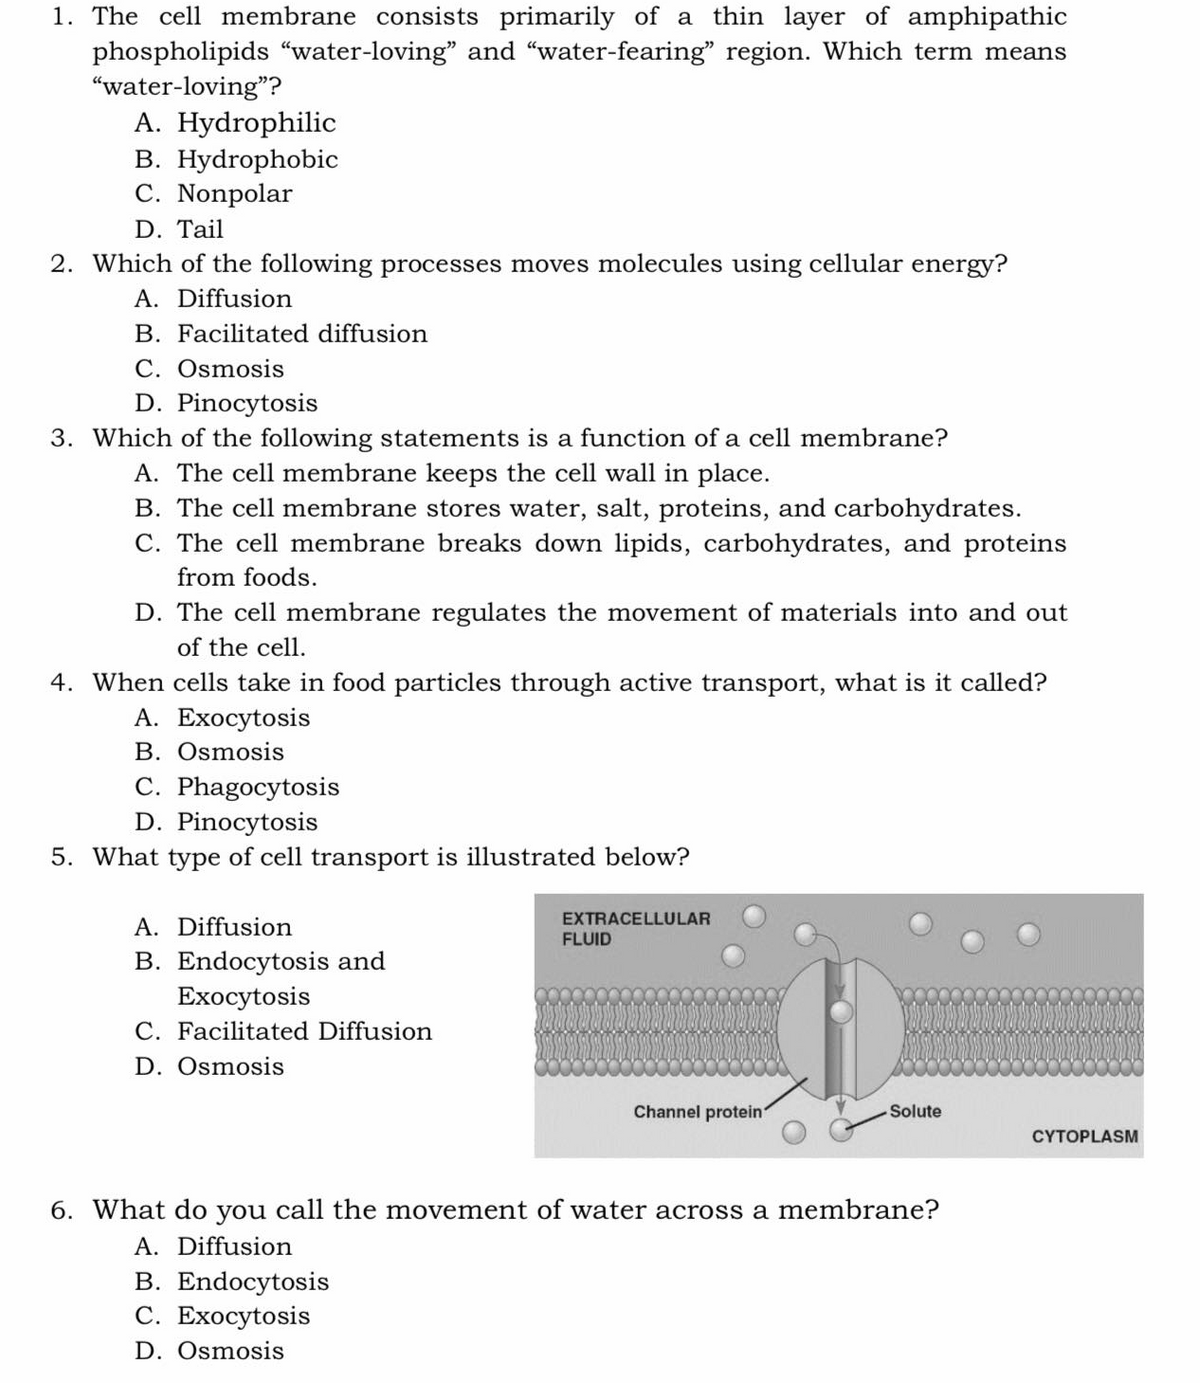 1. The cell membrane consists primarily of a thin layer of amphipathic
phospholipids "water-loving" and "water-fearing" region. Which term means
"water-loving"?
A. Hydrophilic
B. Hydrophobic
C. Nonpolar
D. Tail
2. Which of the following processes moves molecules using cellular energy?
A. Diffusion
B. Facilitated diffusion
C. Osmosis
D. Pinocytosis
3. Which of the following statements is a function of a cell membrane?
A. The cell membrane keeps the cell wall in place.
B. The cell membrane stores water, salt, proteins, and carbohydrates.
C. The cell membrane breaks down lipids, carbohydrates, and proteins
from foods.
D. The cell membrane regulates the movement of materials into and out
of the cell.
4. When cells take in food particles through active transport, what is it called?
А. Ехоcytosis
B. Osmosis
C. Phagocytosis
D. Pinocytosis
5. What type of cell transport is illustrated below?
EXTRACELLULAR
A. Diffusion
FLUID
B. Endocytosis and
Exocytosis
C. Facilitated Diffusion
D. Osmosis
Channel protein
Solute
CYTOPLASM
6. What do you call the movement of water across a membrane?
A. Diffusion
B. Endocytosis
С. Ехосytosis
D. Osmosis
